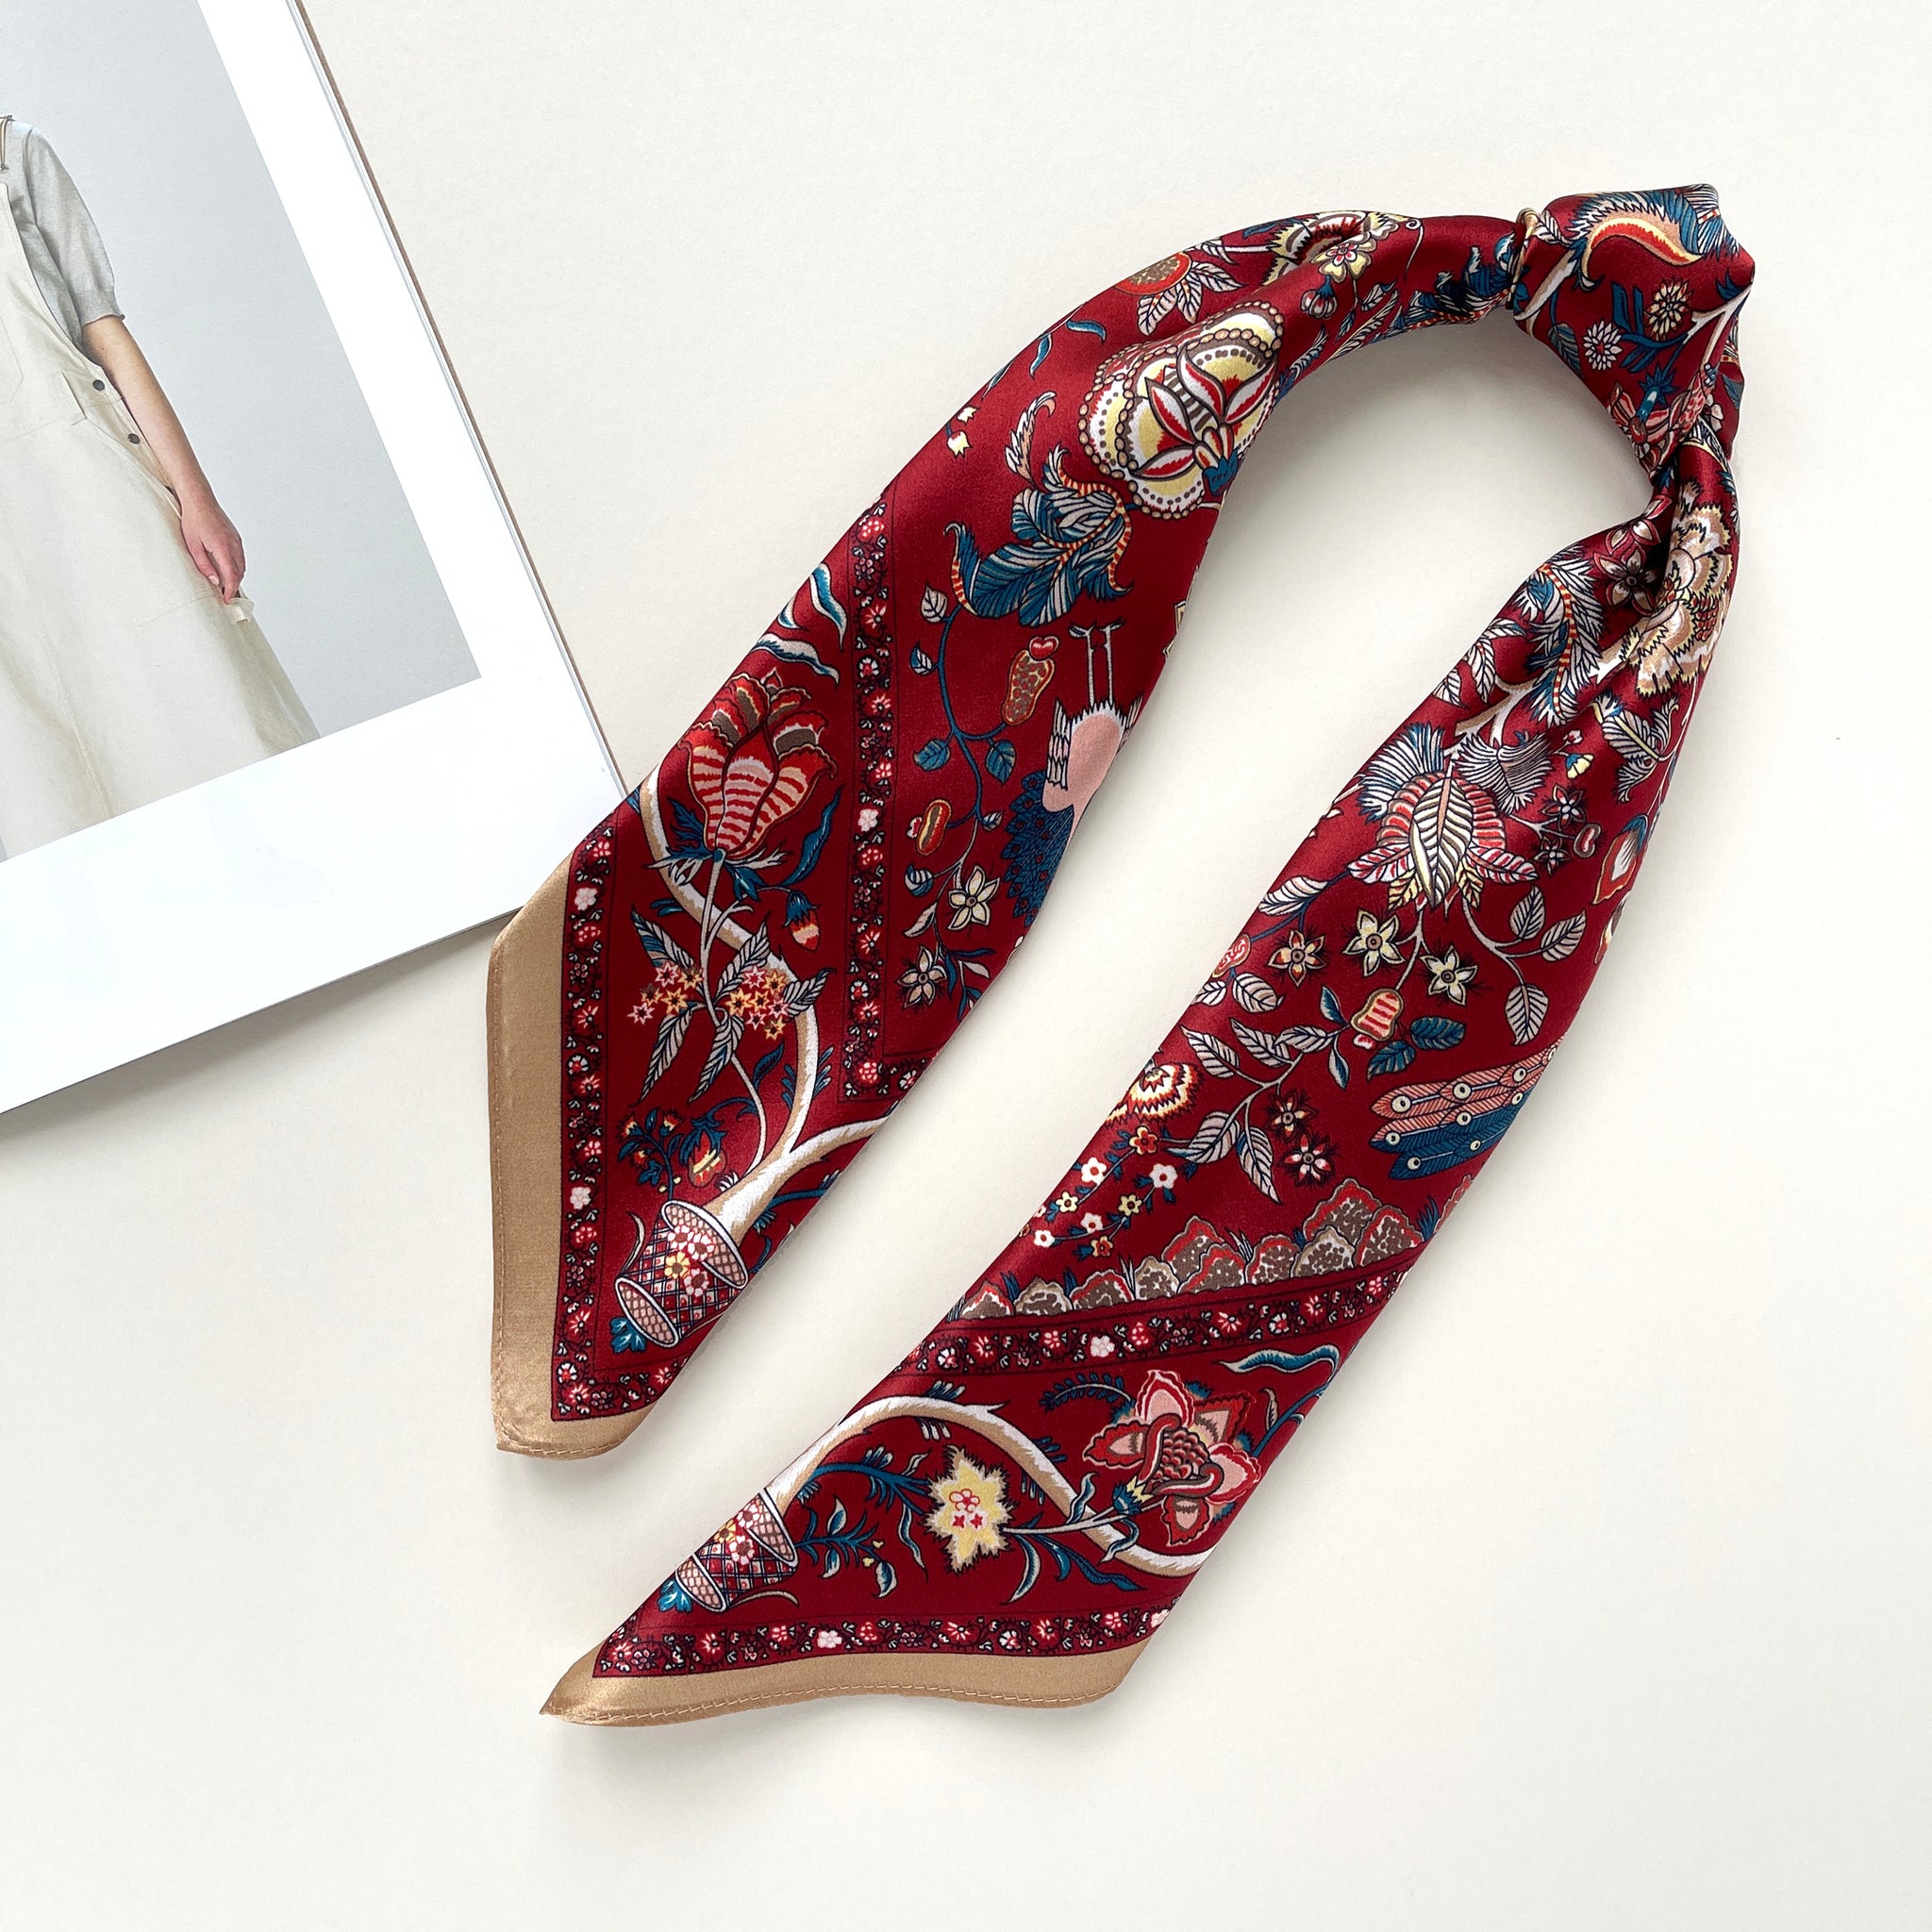 red vintage inspired floral silk scarf with beige edge knotted as a ponytail